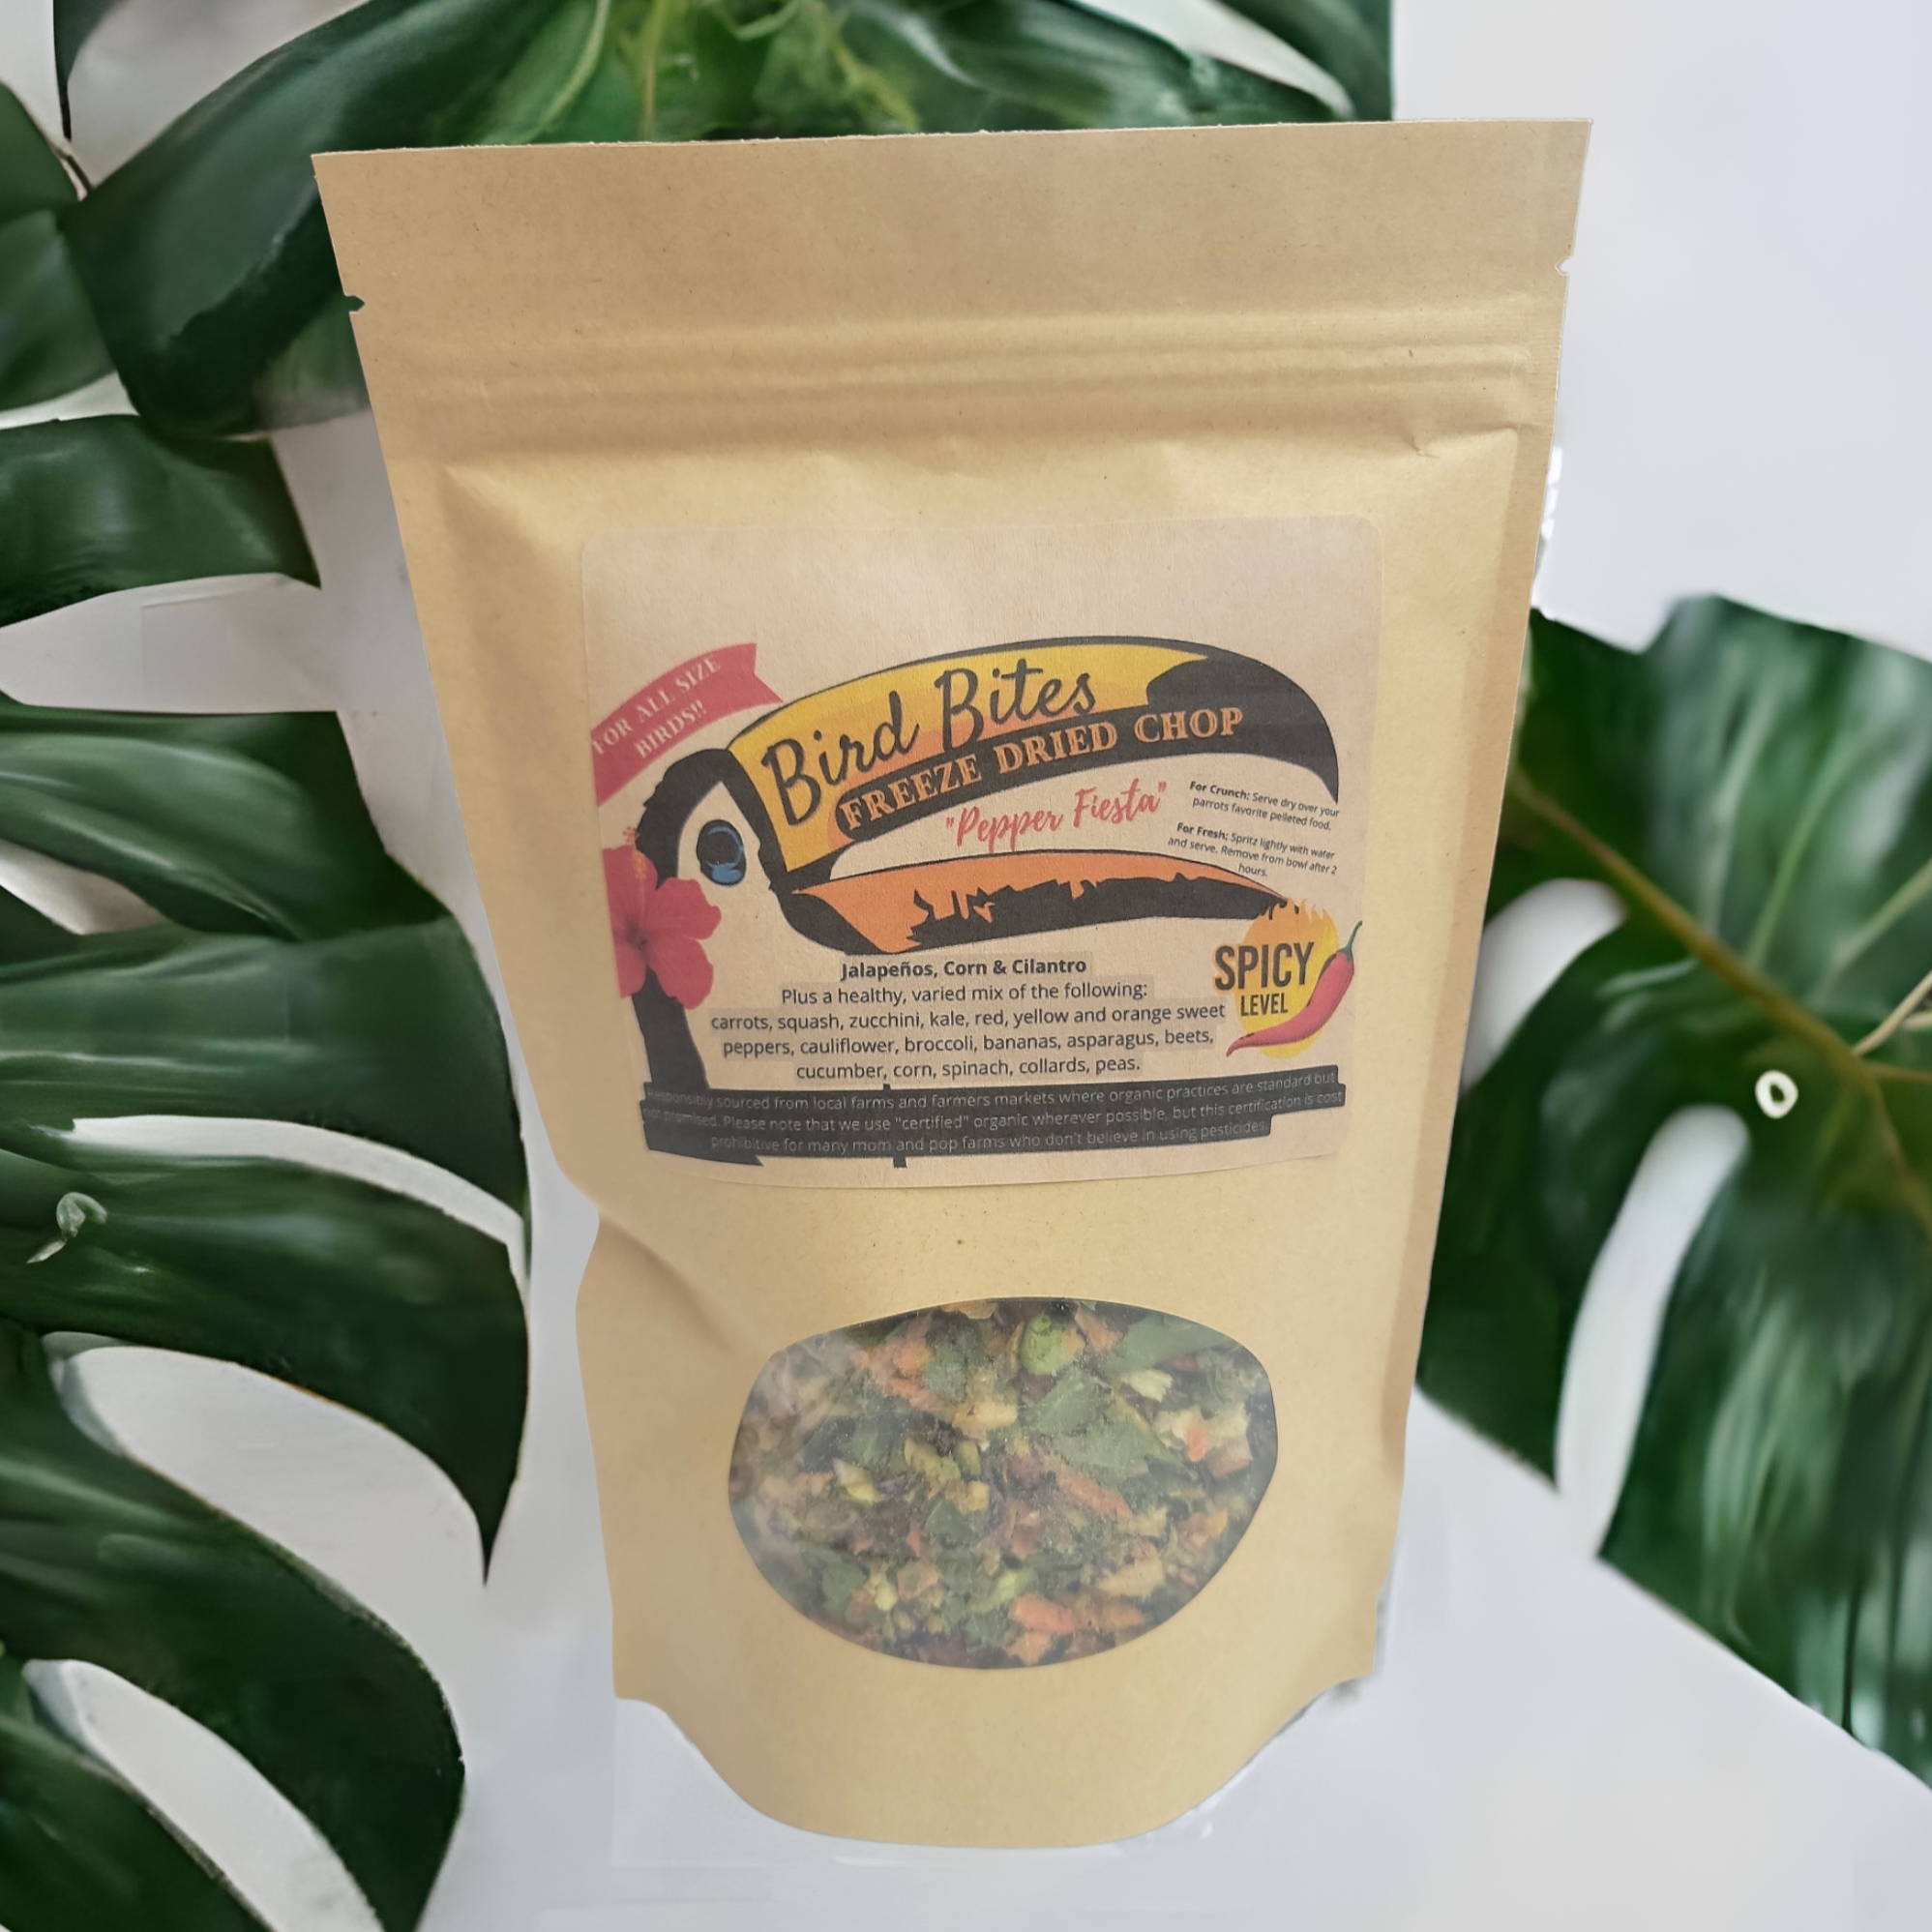 Bird Bites Freeze Dried Chop - Daily Fruits & Veggies, 4 Flavors to Choose From